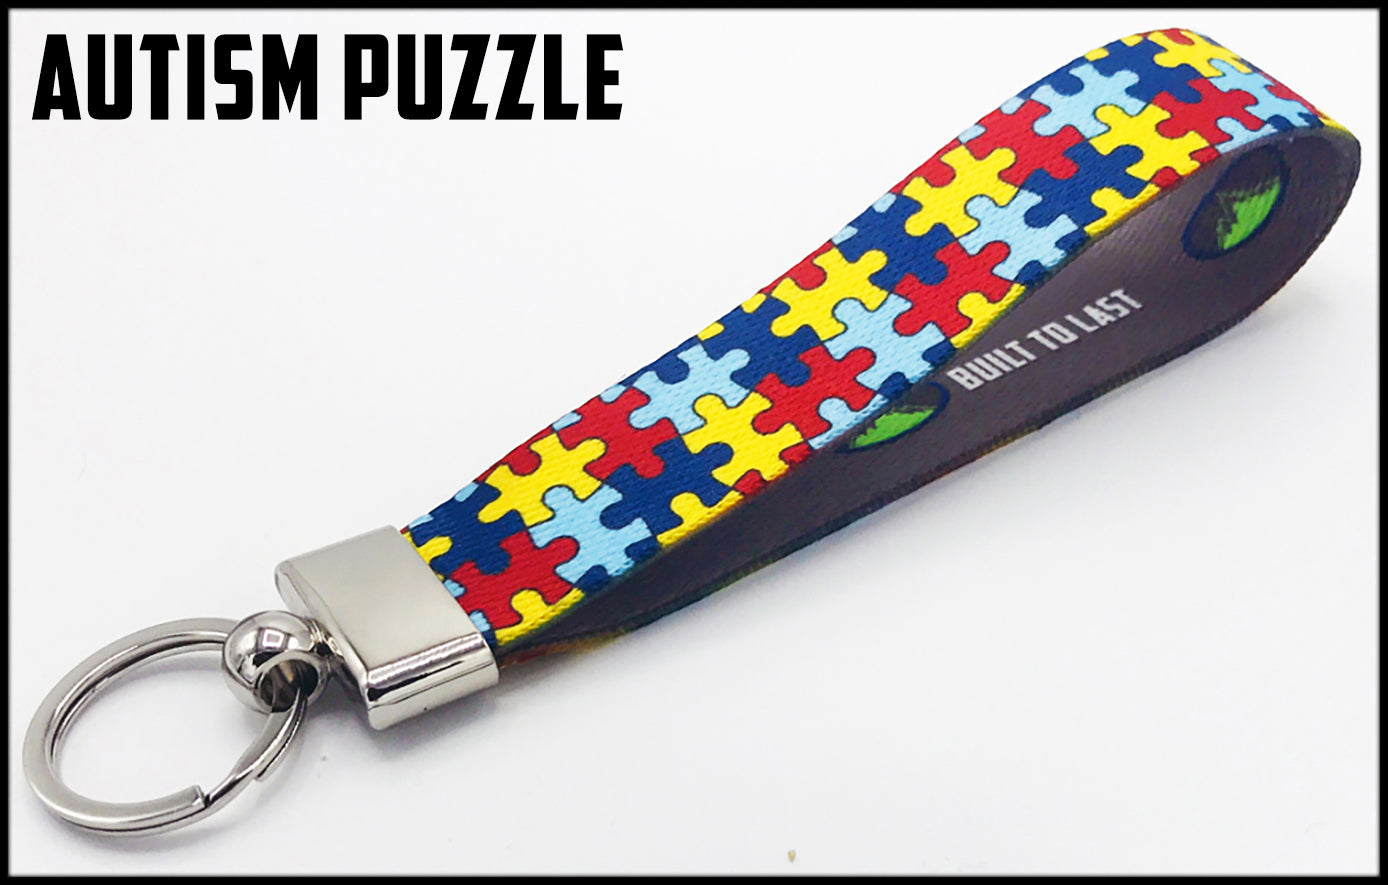 Autism puzzle 1 inch custom picture quality polyester webbing keyfob. Design by Northwest Straps.